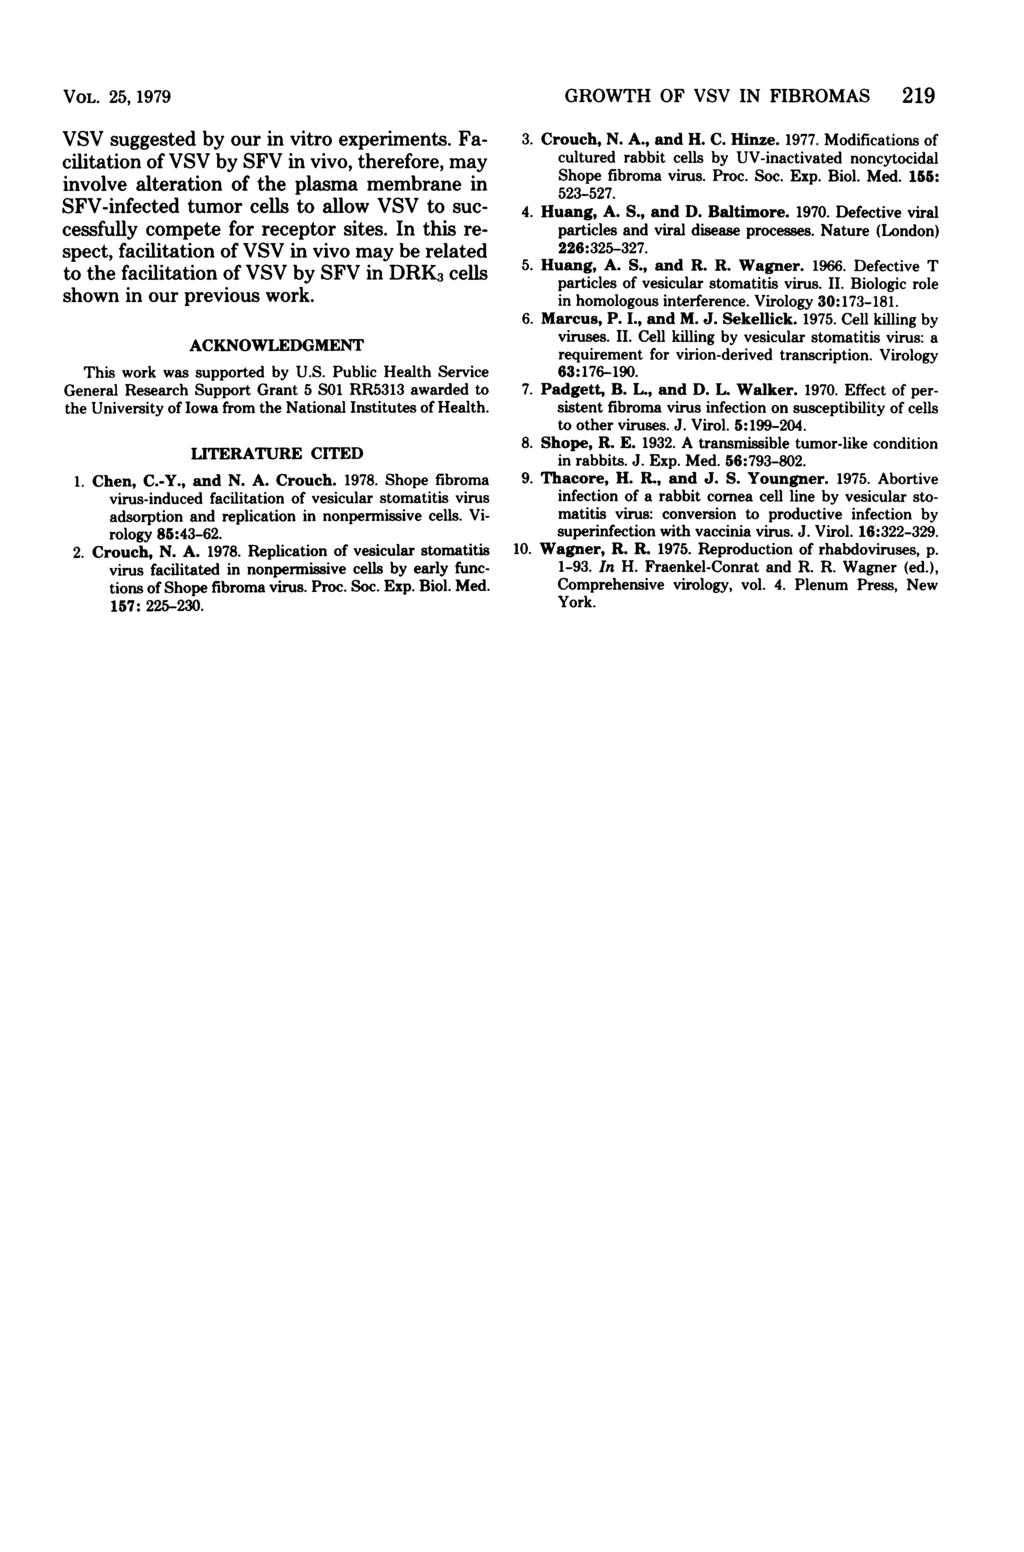 VOL. 25, 1979 VSV suggested by our in vitro experiments.